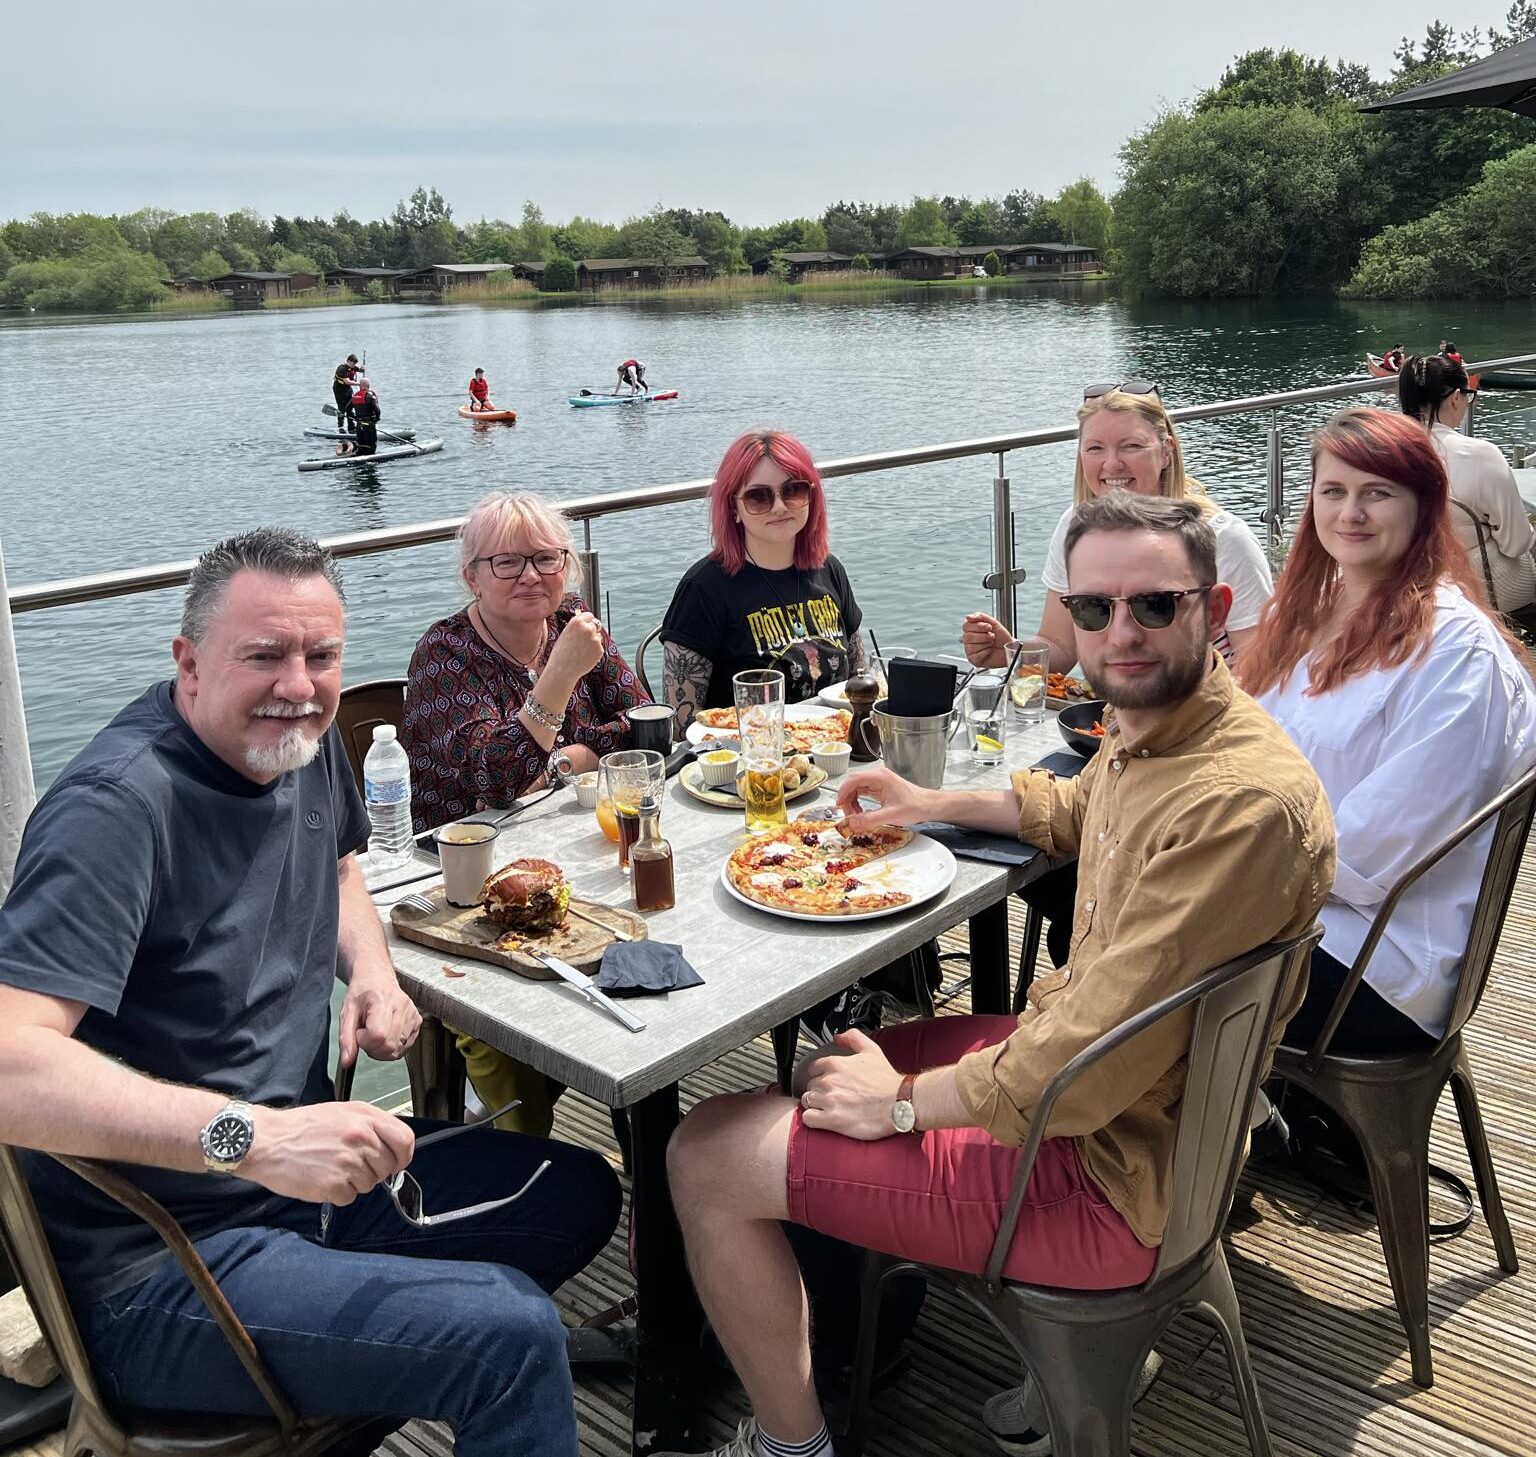 Holler Team enjoying a work outing. From left to right: Mark, Lynn, Jemima, Joe, Michele and Sophie